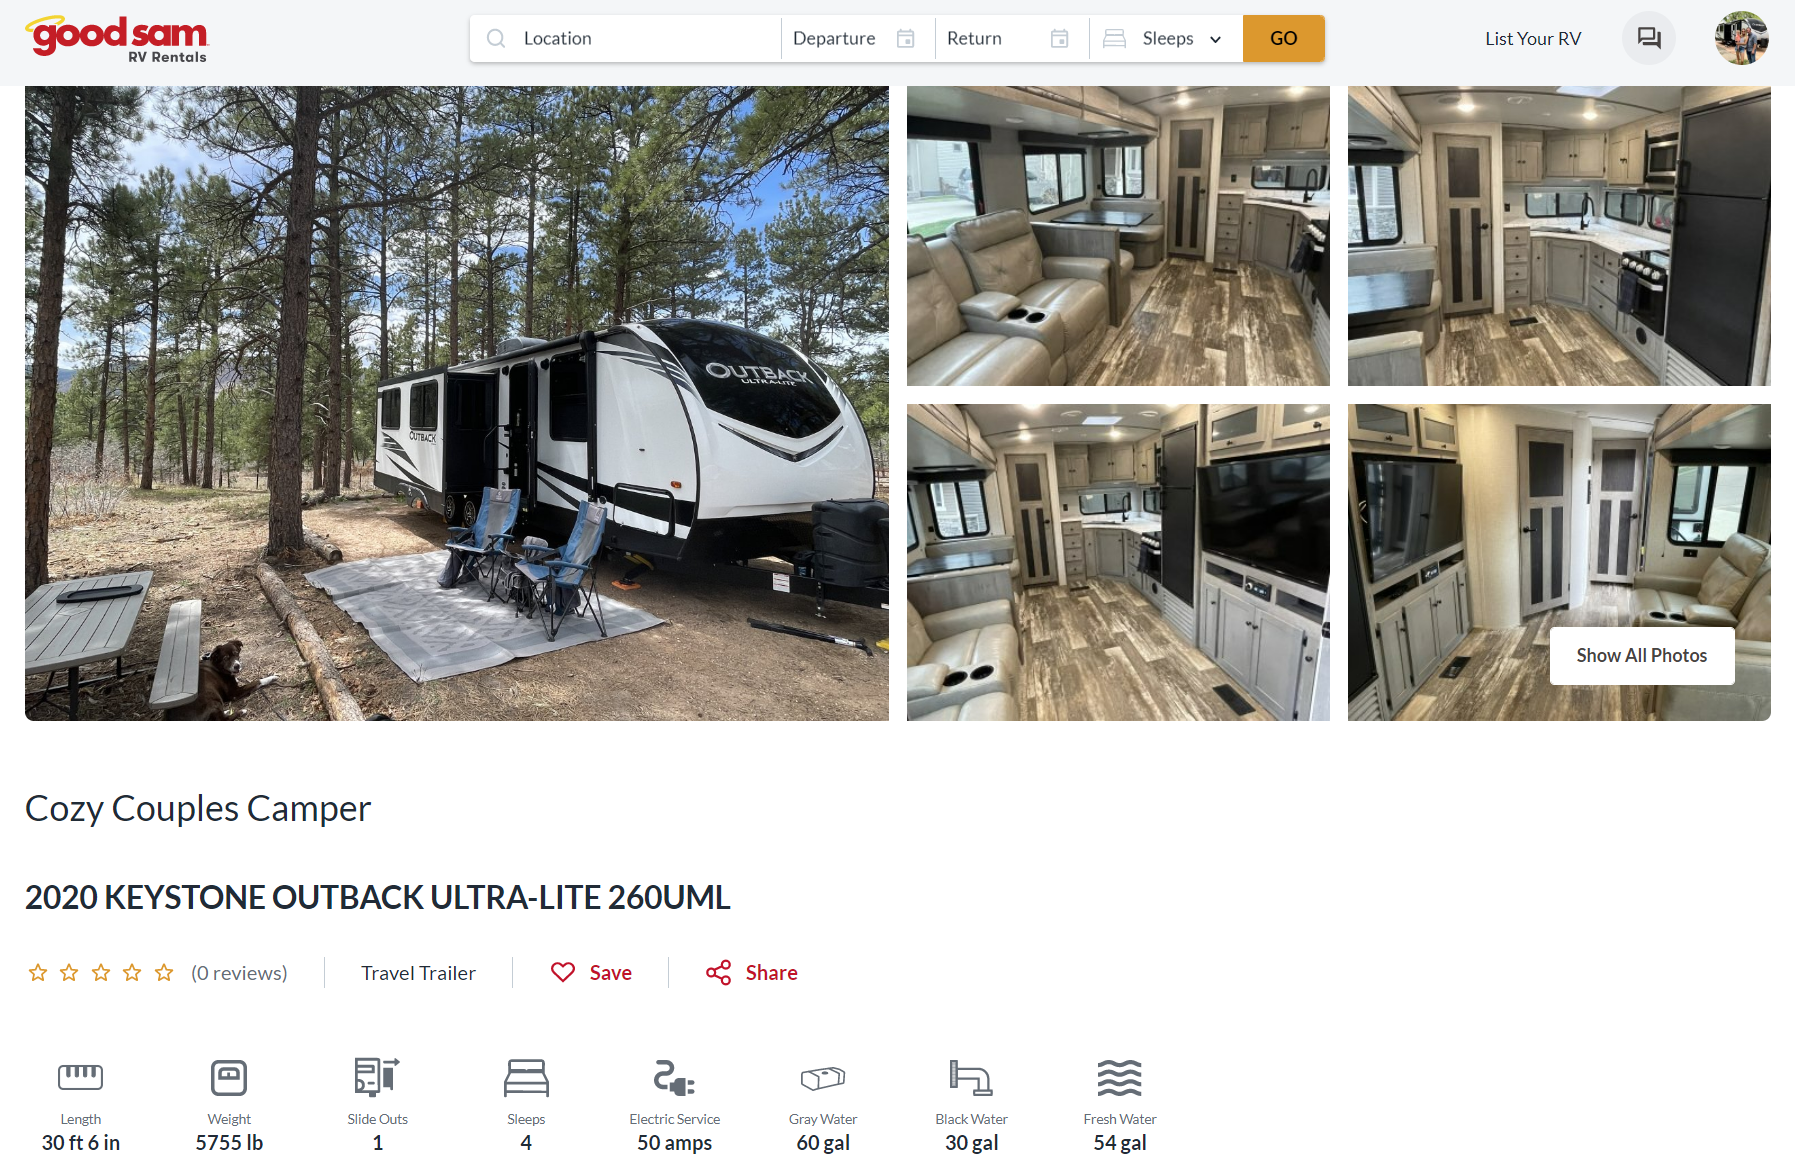 Computer screen showing interior and exterior of travel trailer